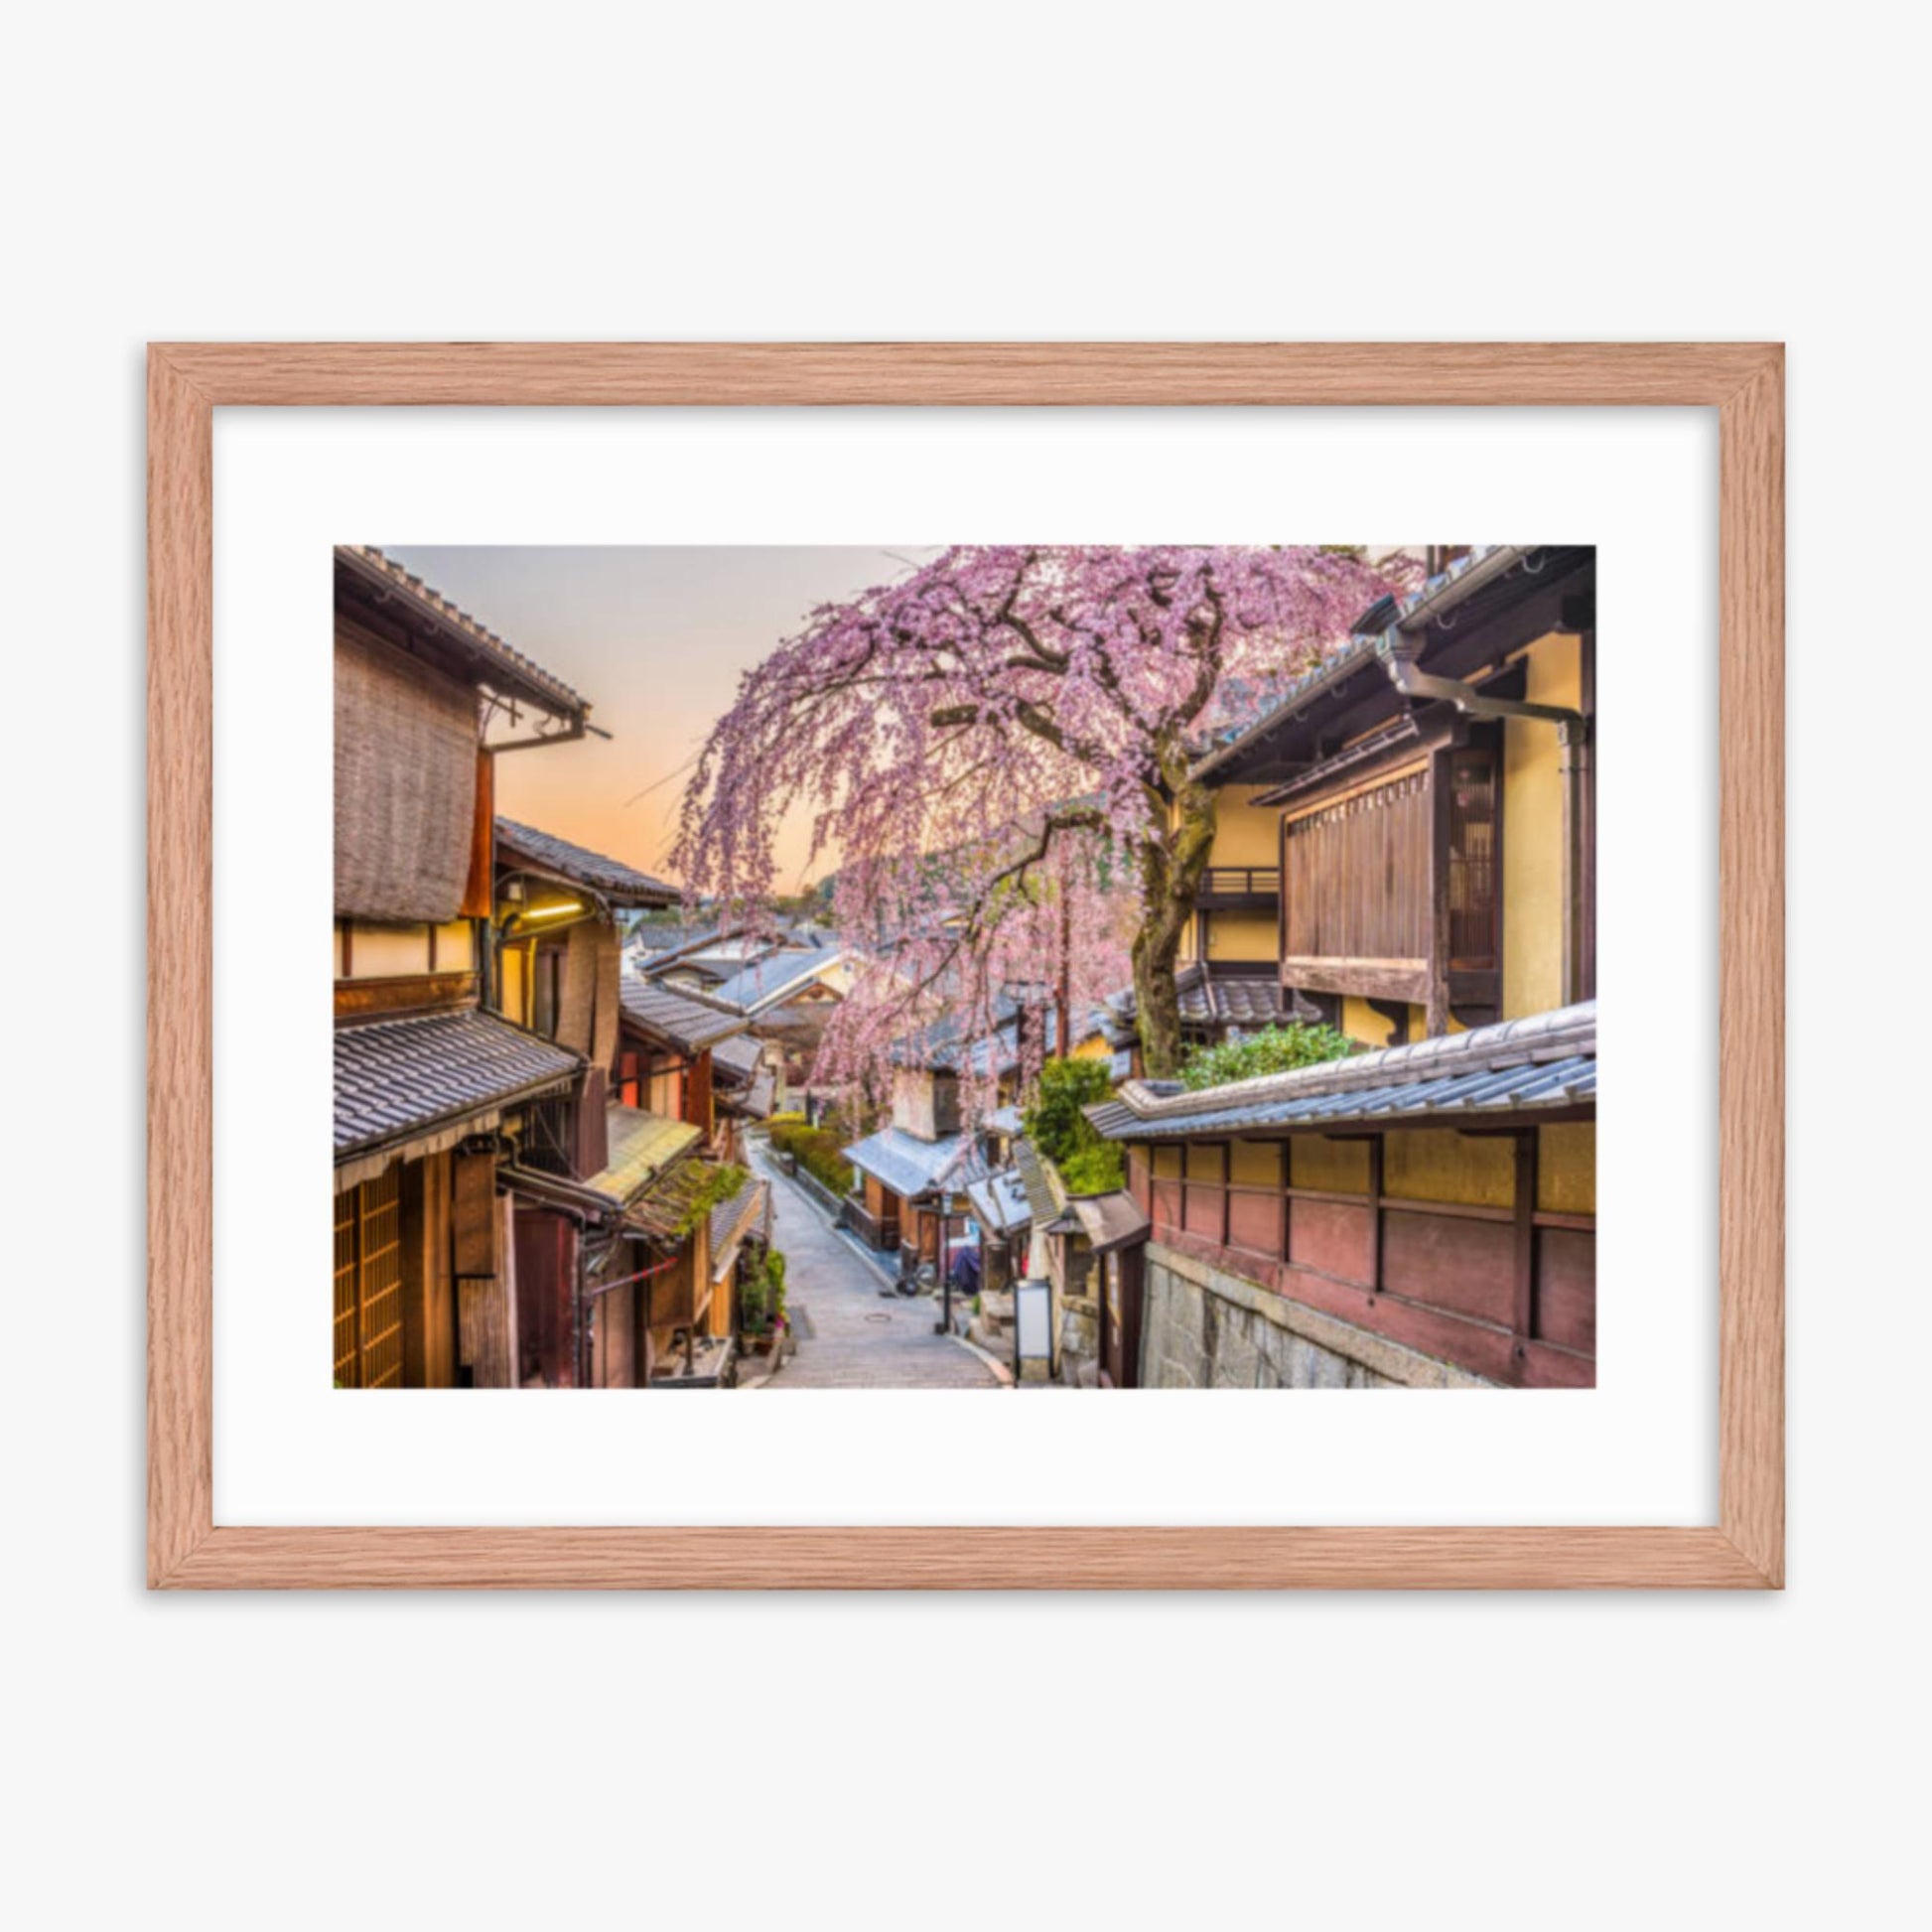 Kyoto, Japan in Sprint 18x24 in Poster With Oak Frame